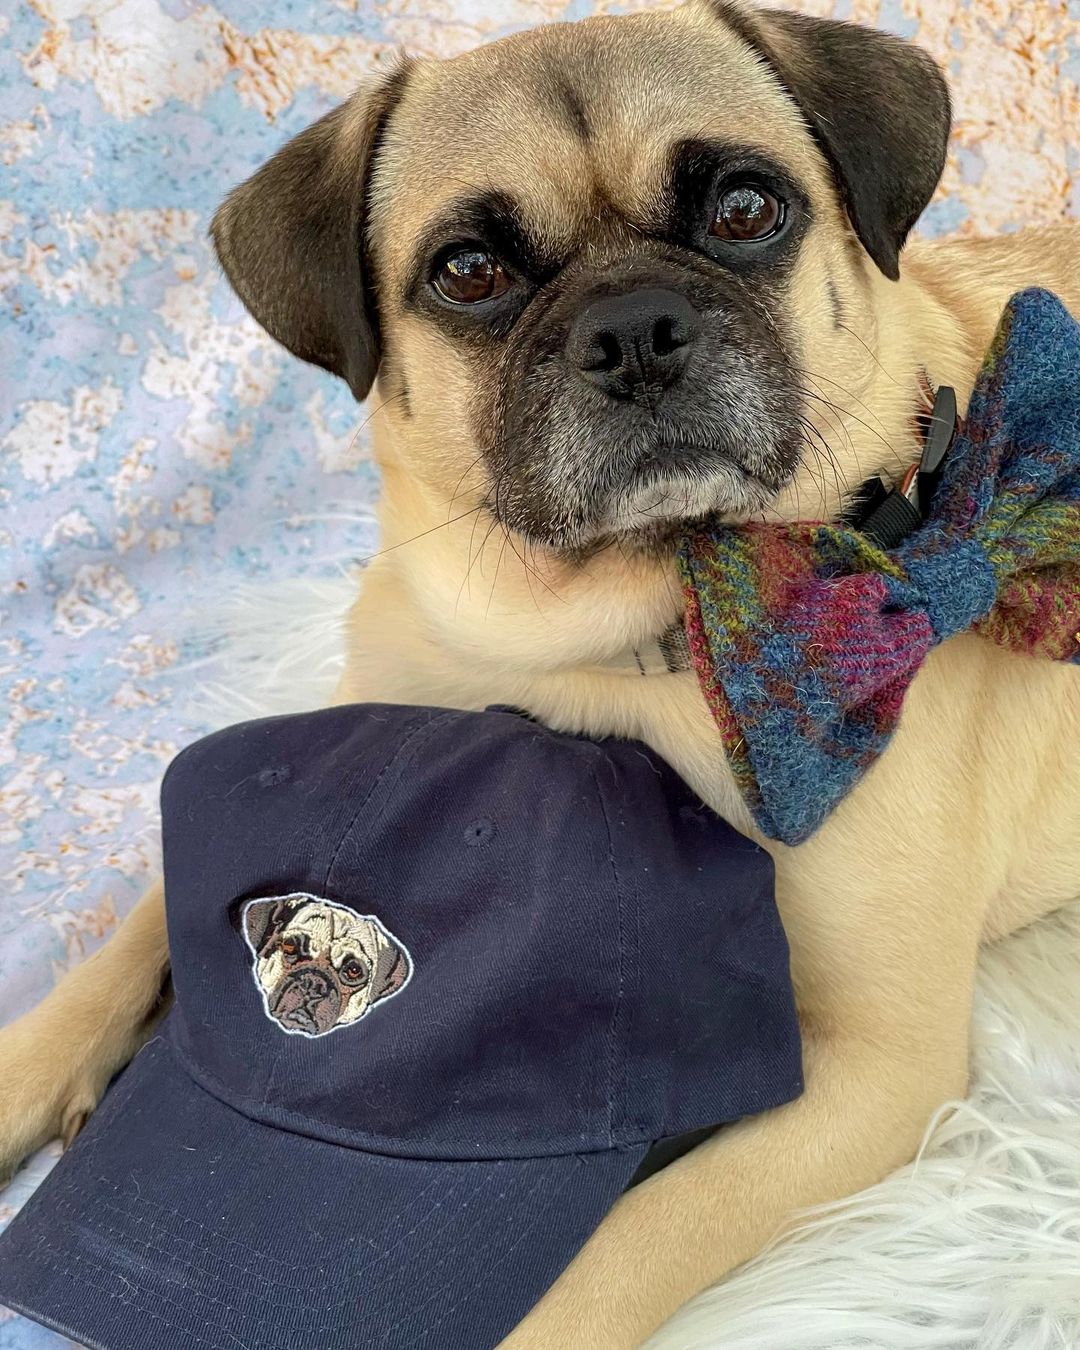 A fancy pug poses next to a navy dad hat with a dog on it.